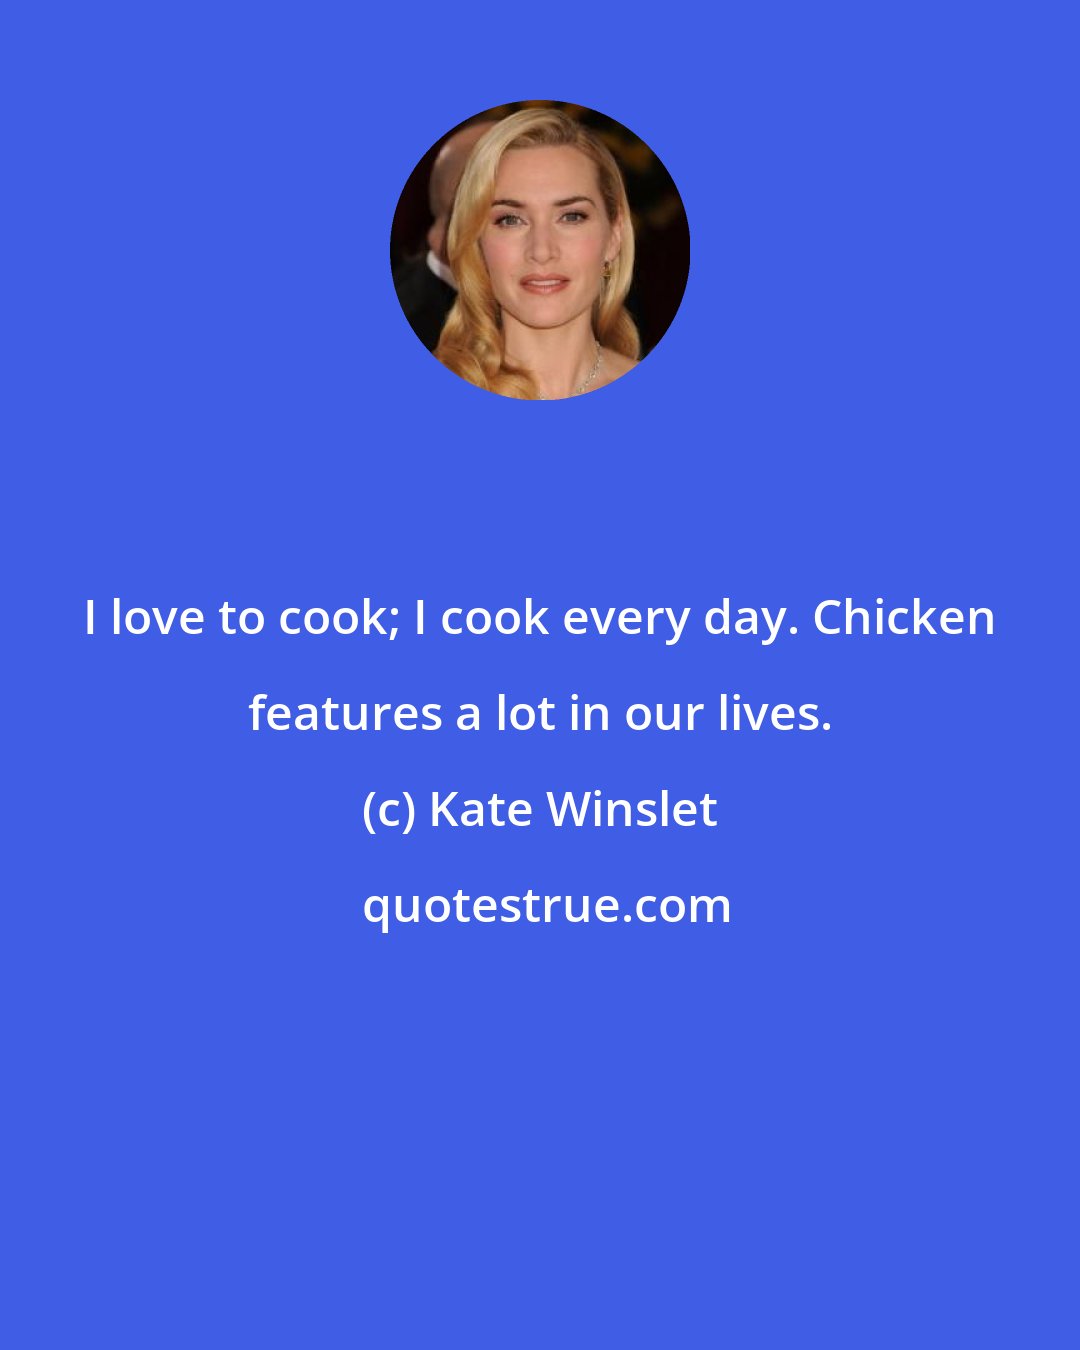 Kate Winslet: I love to cook; I cook every day. Chicken features a lot in our lives.